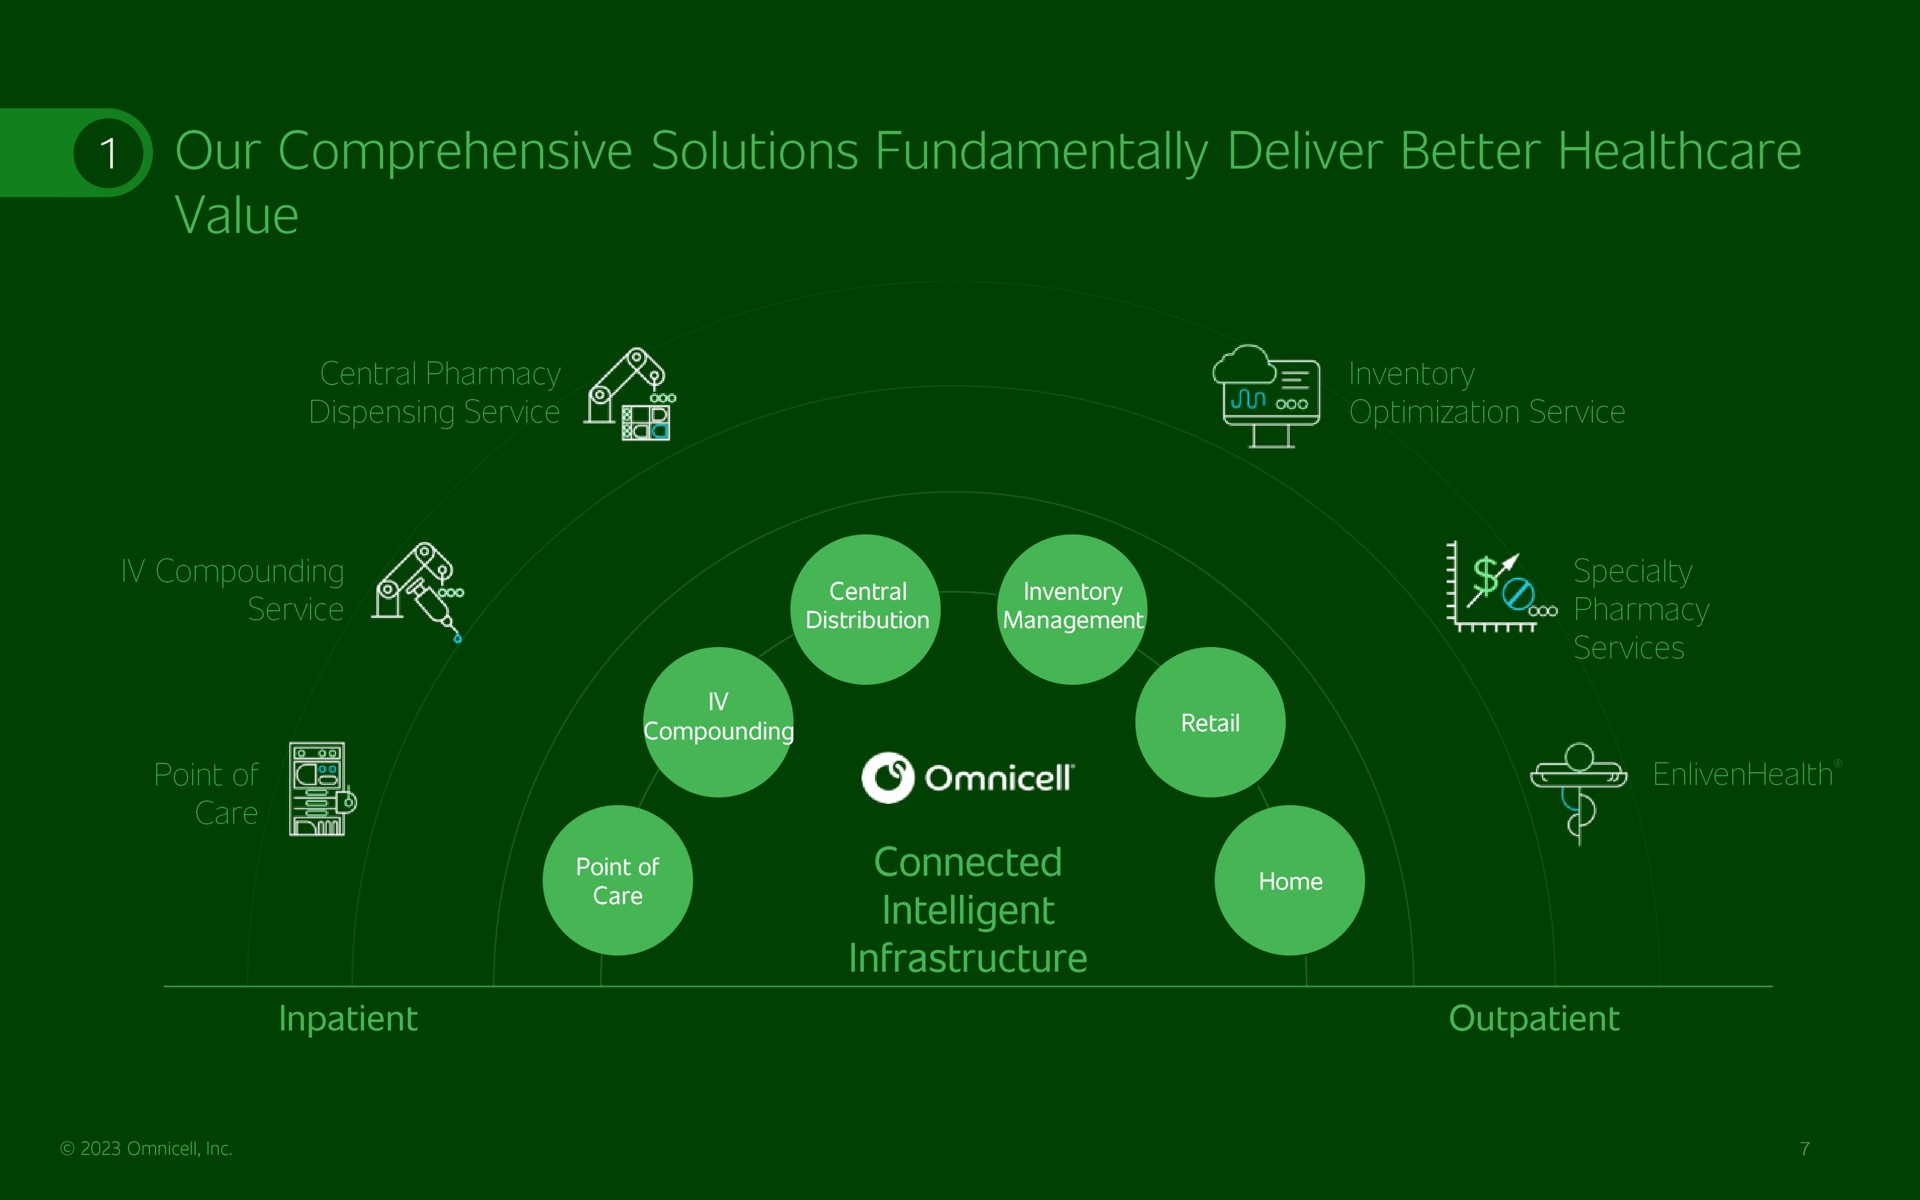 our comprehensive solutions fundamentally deliver better value nema service connected intelligent infrastructure inpatient outpatient | Omnicell